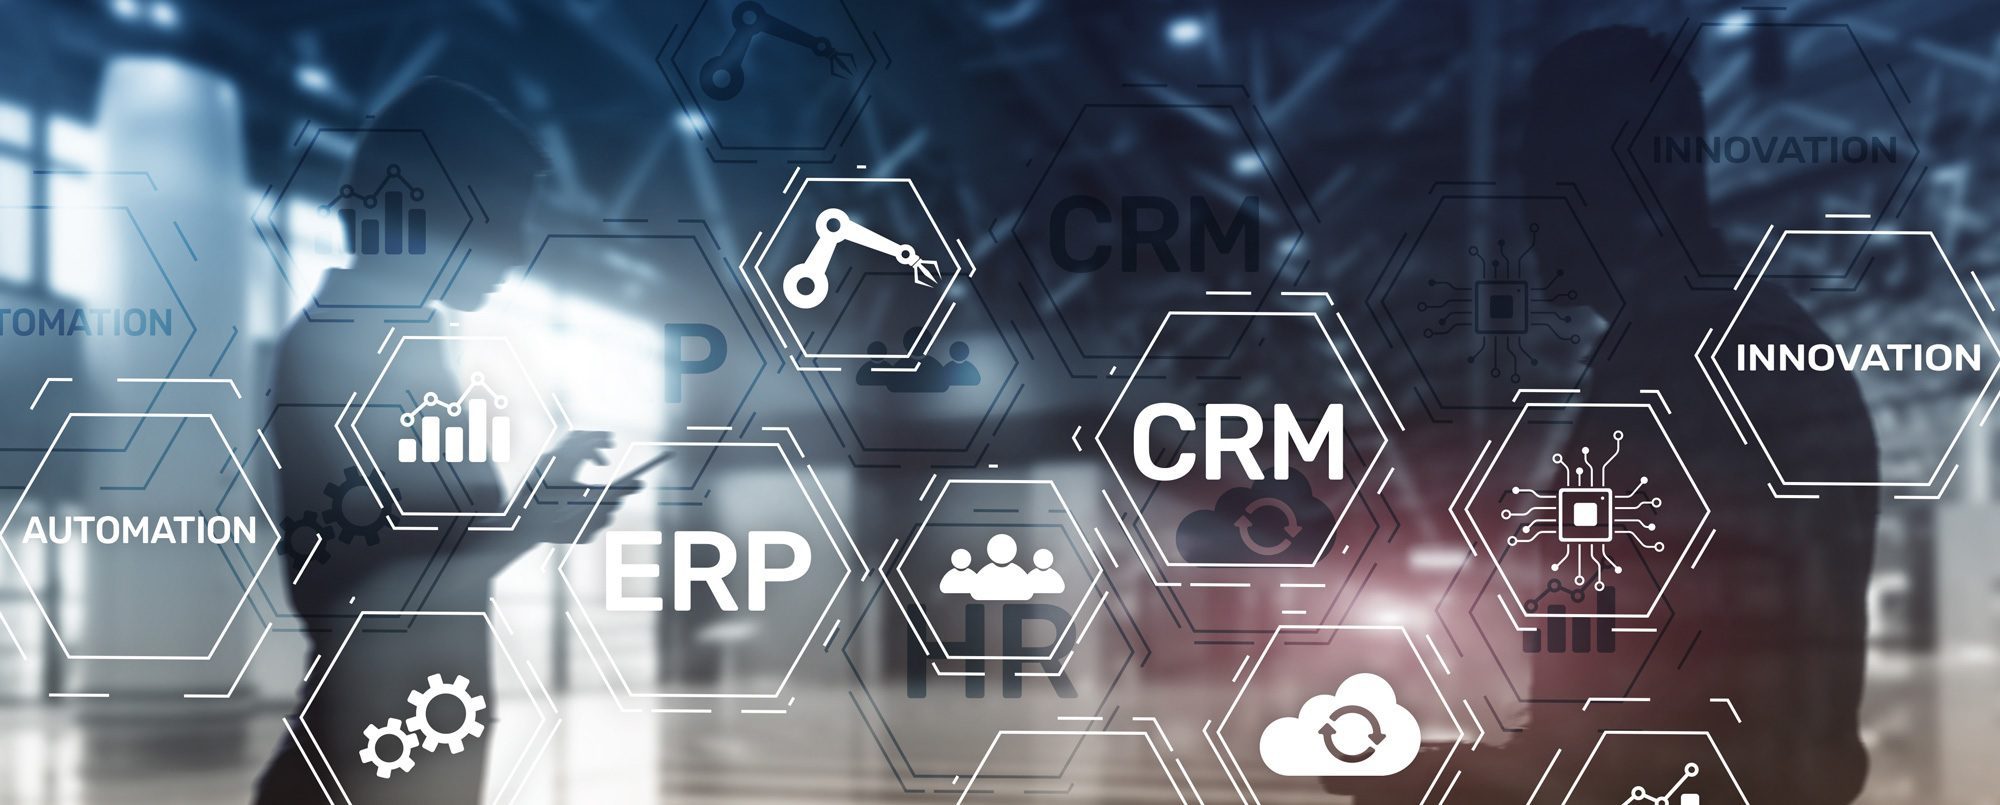 CRM vs ERP Know the Differences